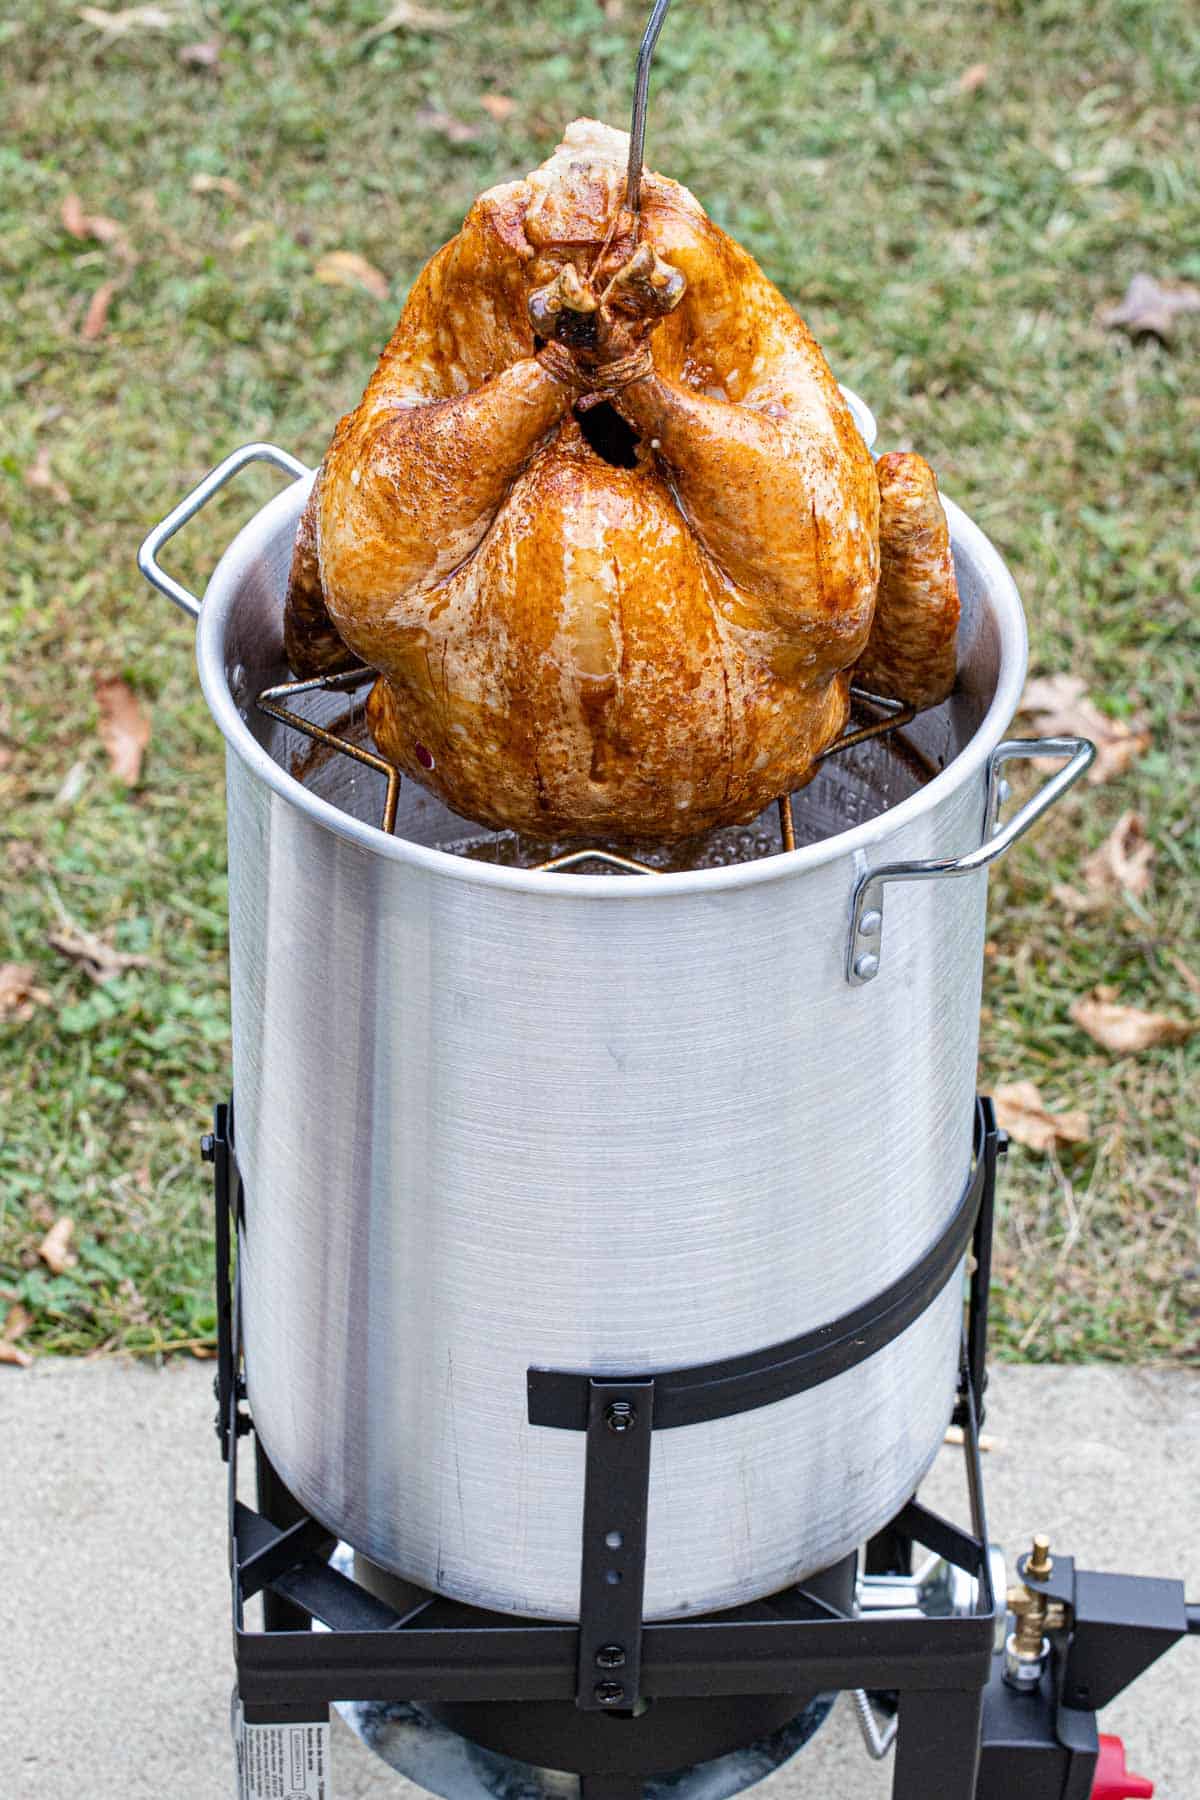 Golden and juicy fried turkey raised out of the fryer pot 